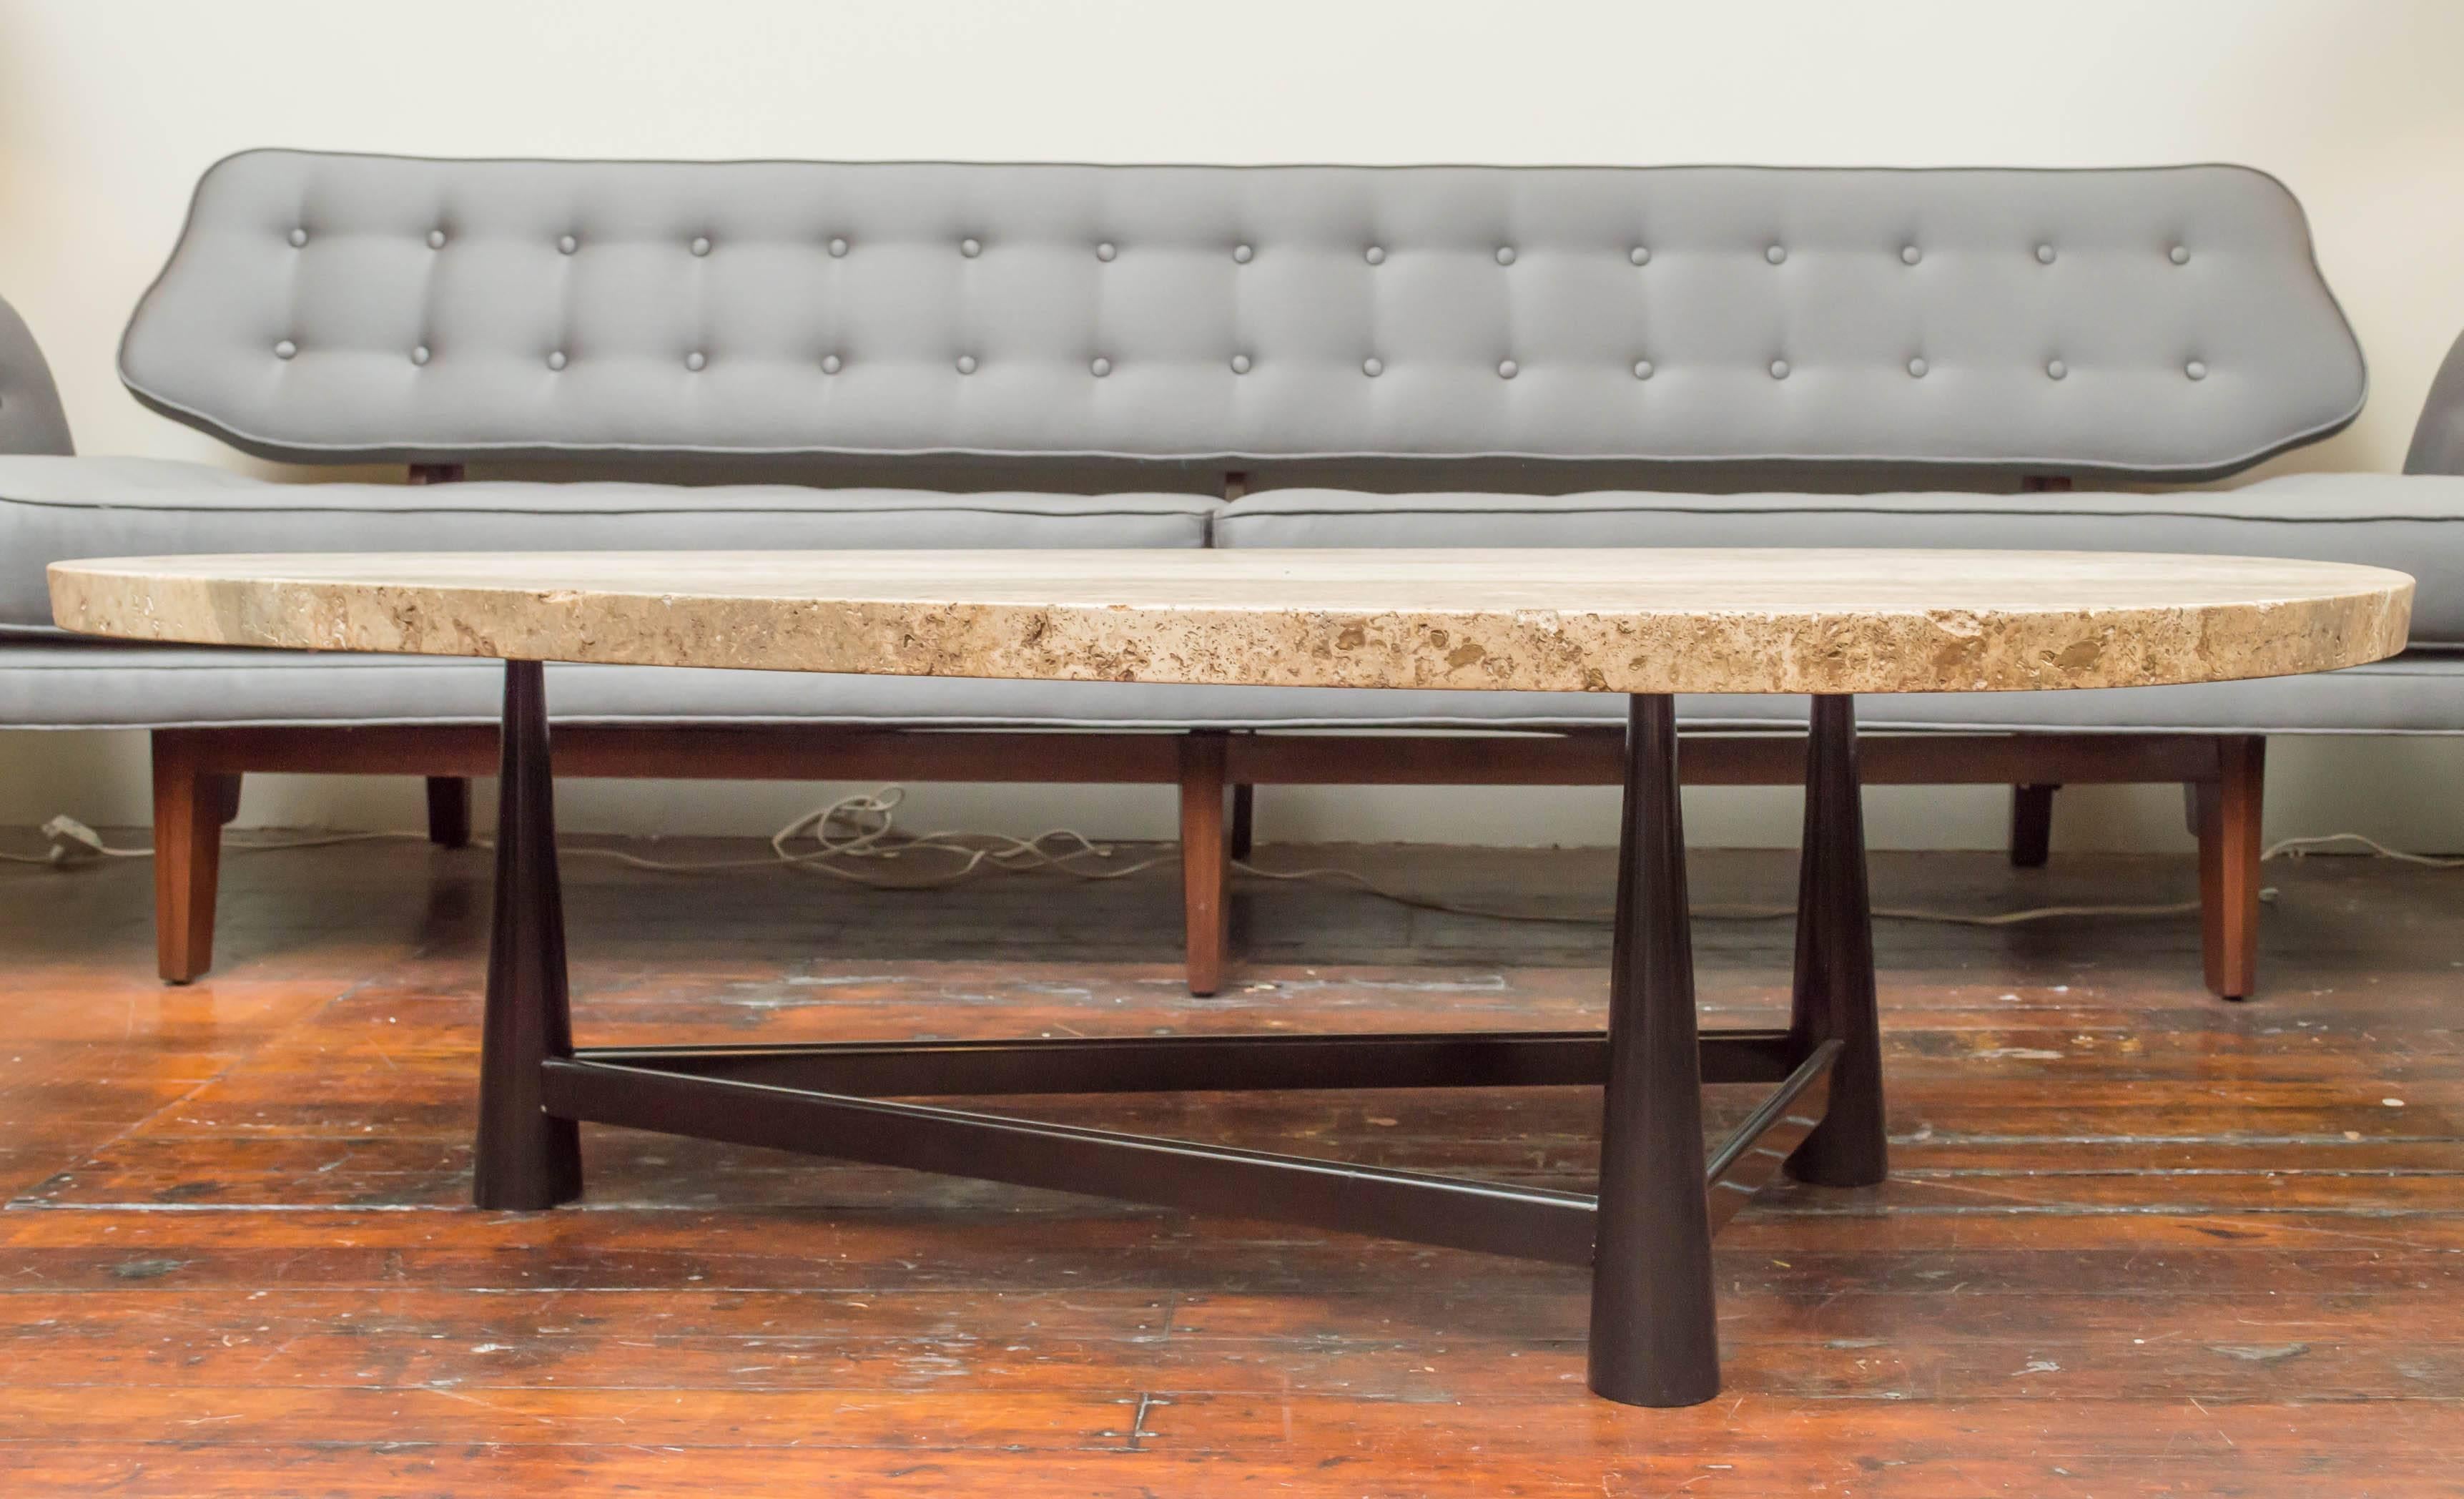 Rare design coffee table by Edward Wormley for Dunbar, model 521. Triangular base made of black lacquered aluminum with Italian travertine marble top, stamped.